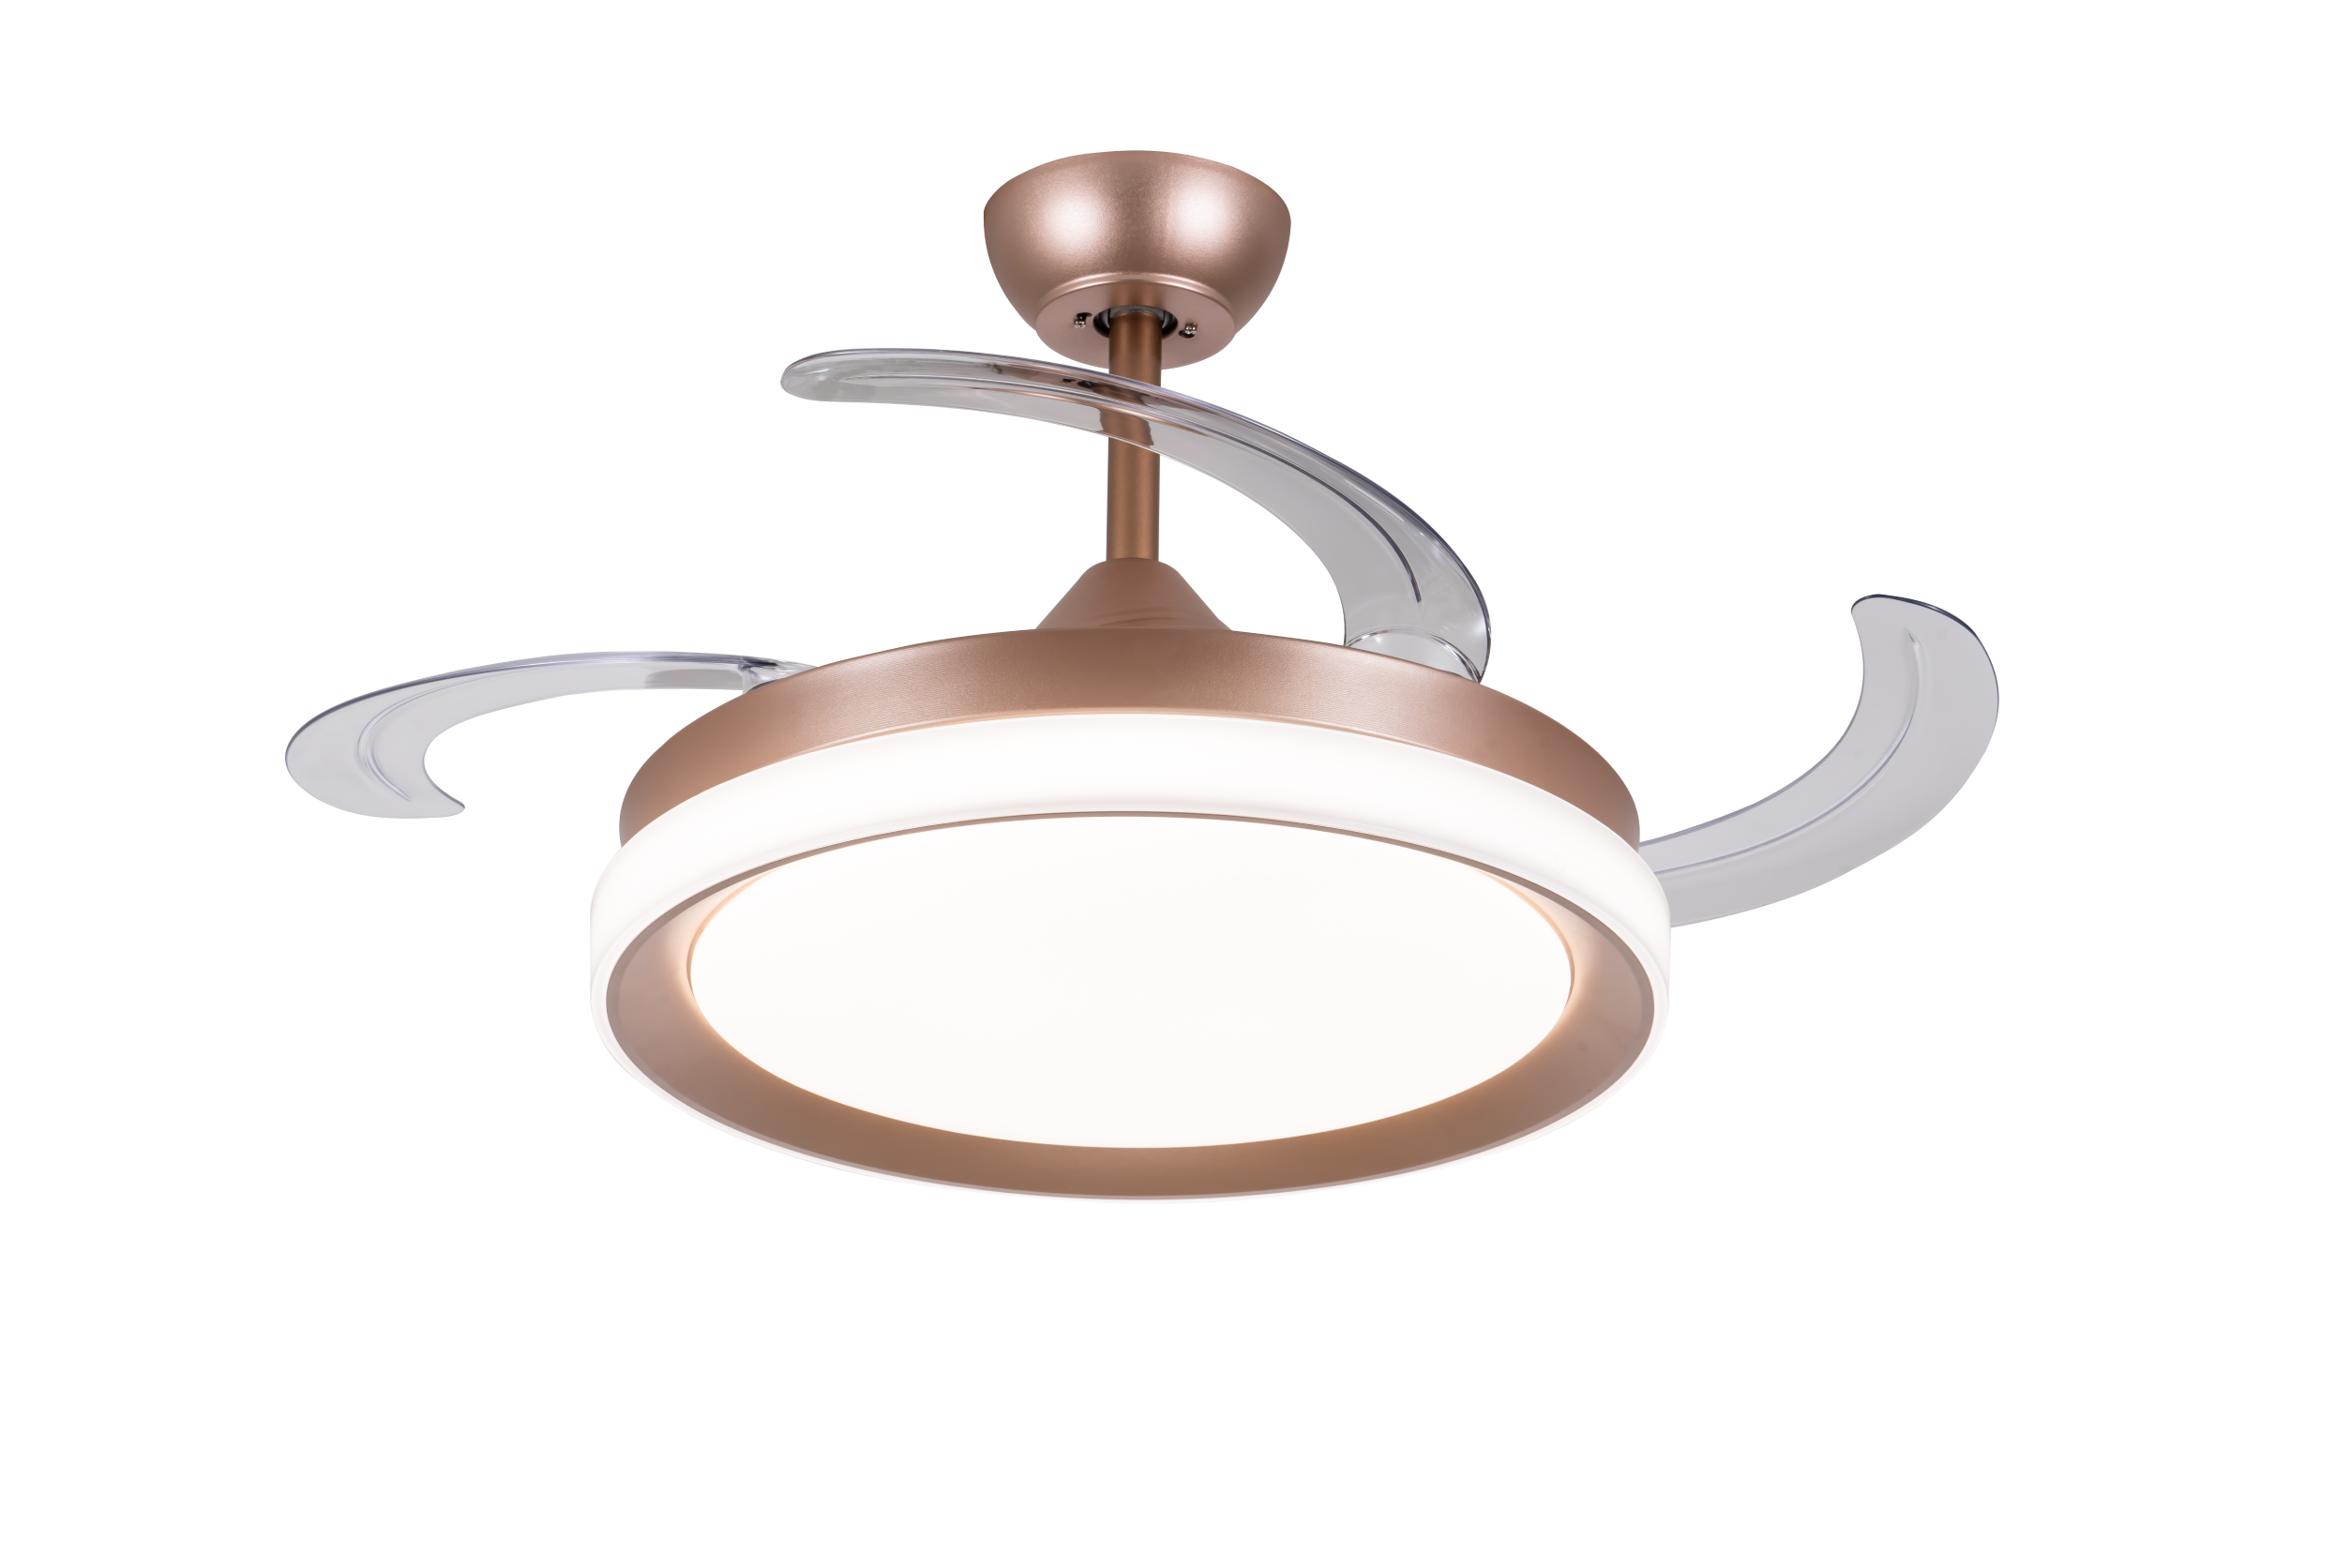 UF-R Series Classic Ceiling Fan with Light 